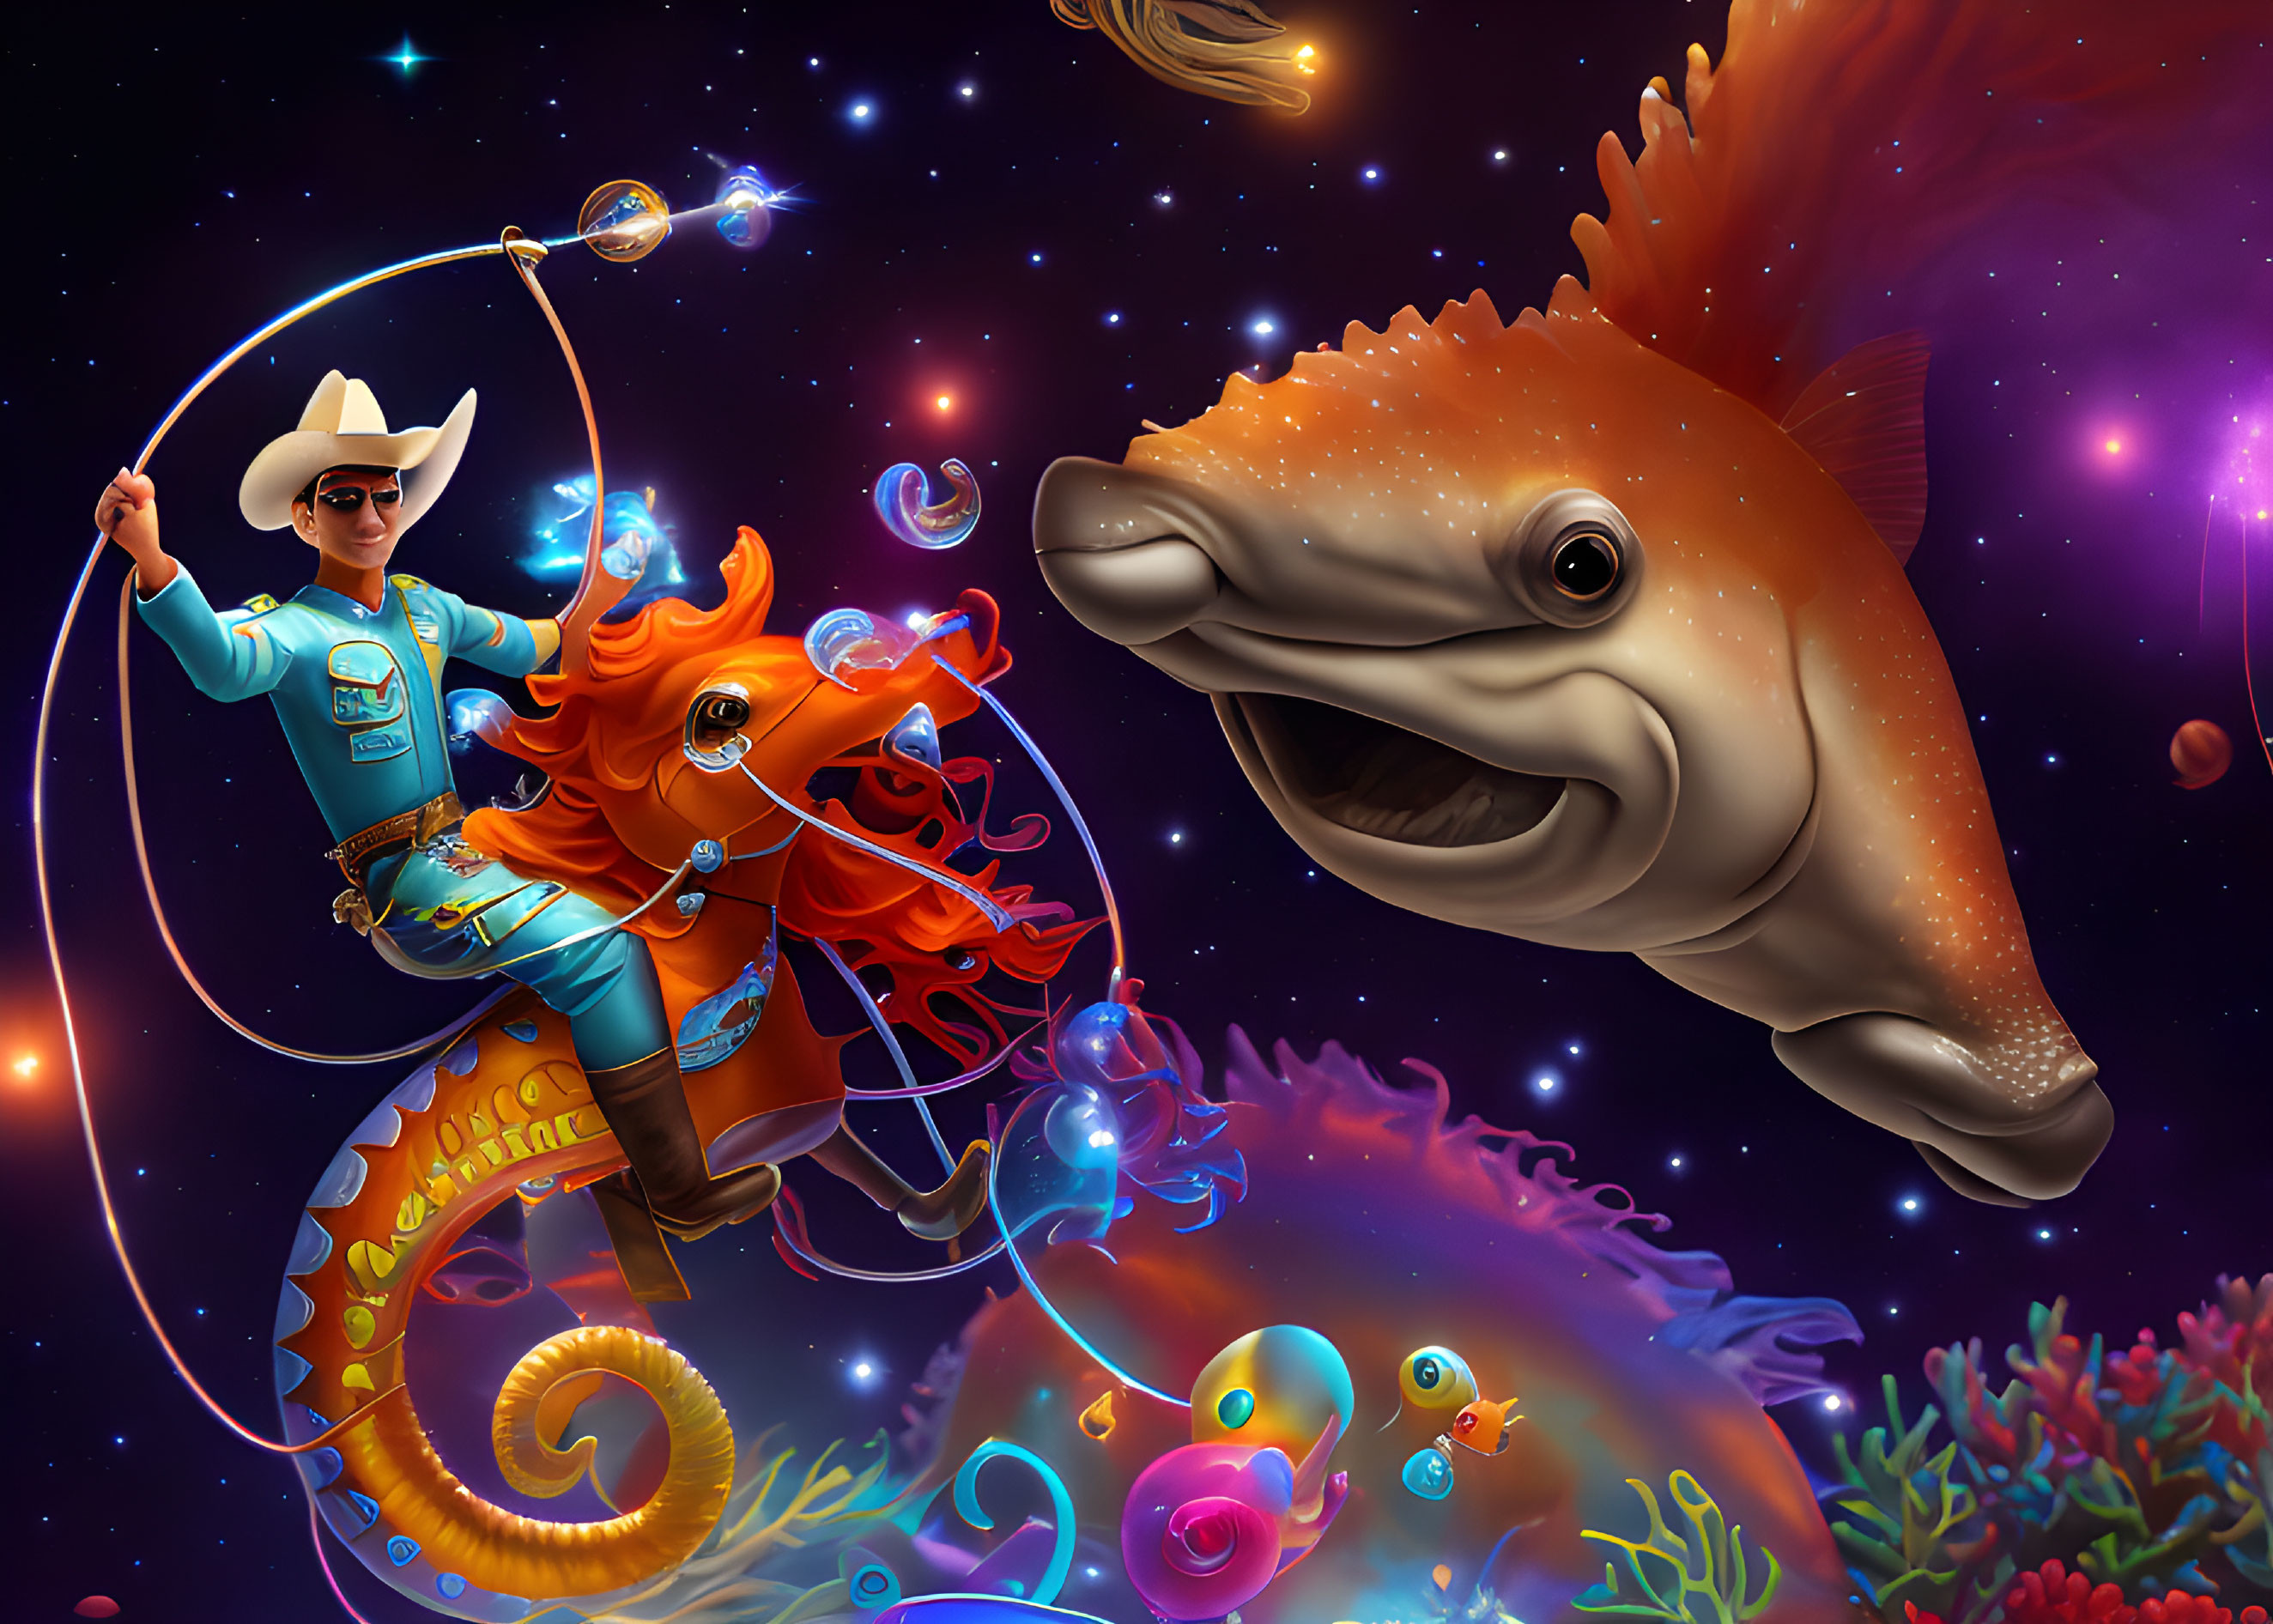 Colorful space cowgirl lassoing bubbles with giant smiling fish in cosmic background